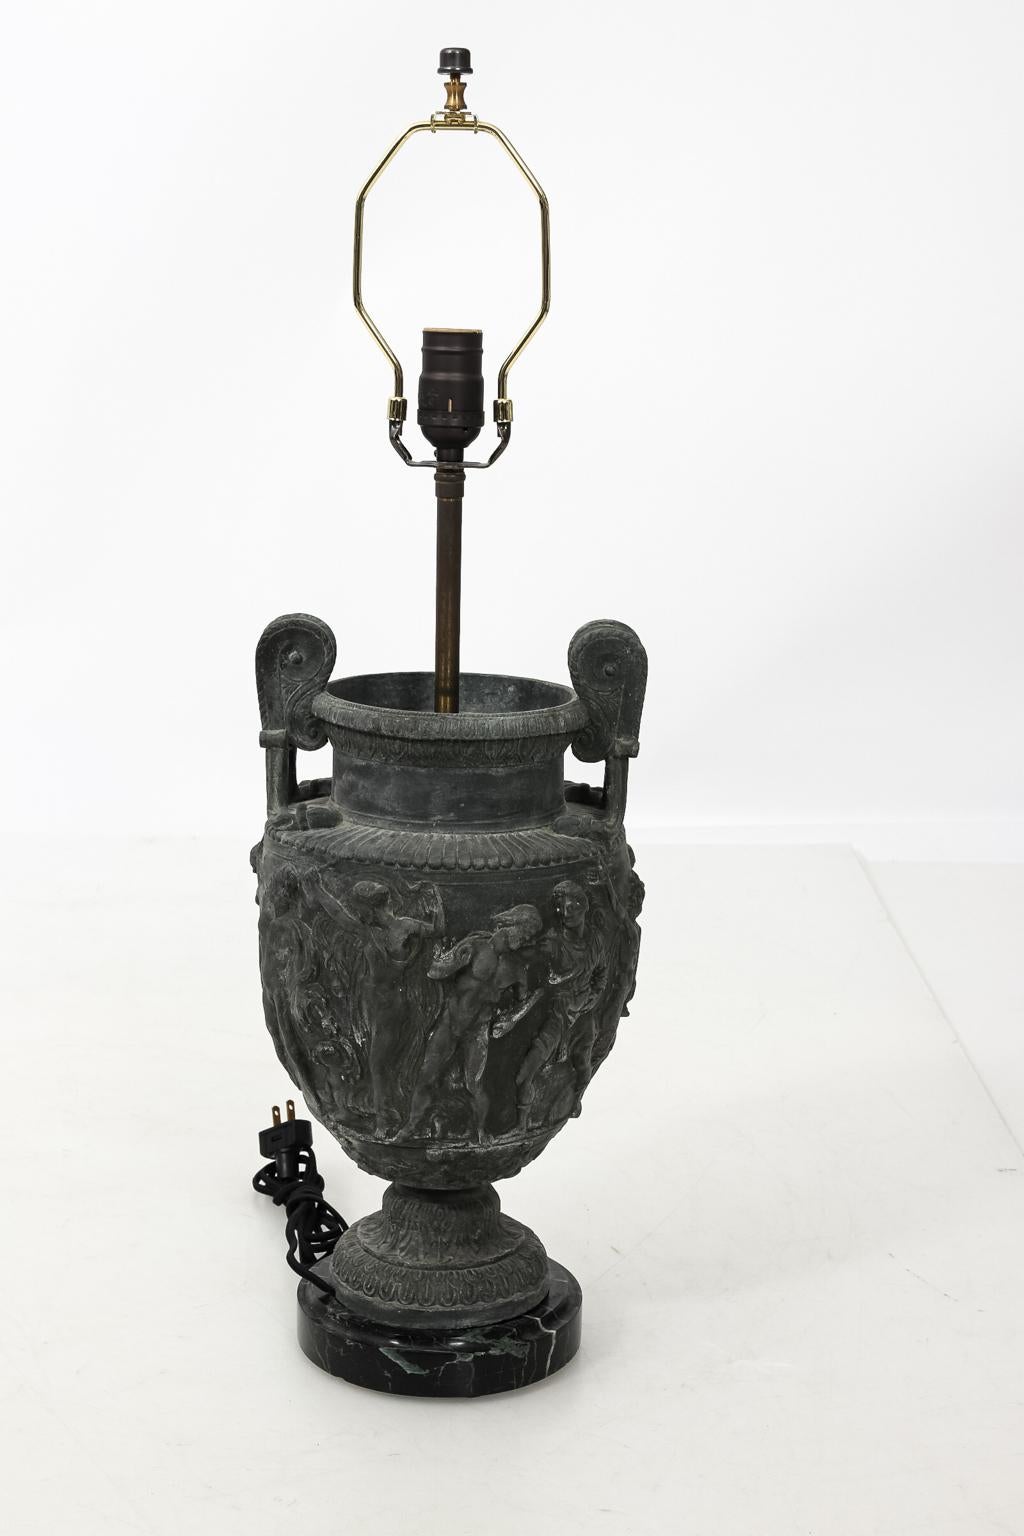 French neoclassical style urn shaped lamp in metal with classical figures on the body, circa 19th century. Shades not included. Please note of wear consistent with age including patina and minor oxidation.